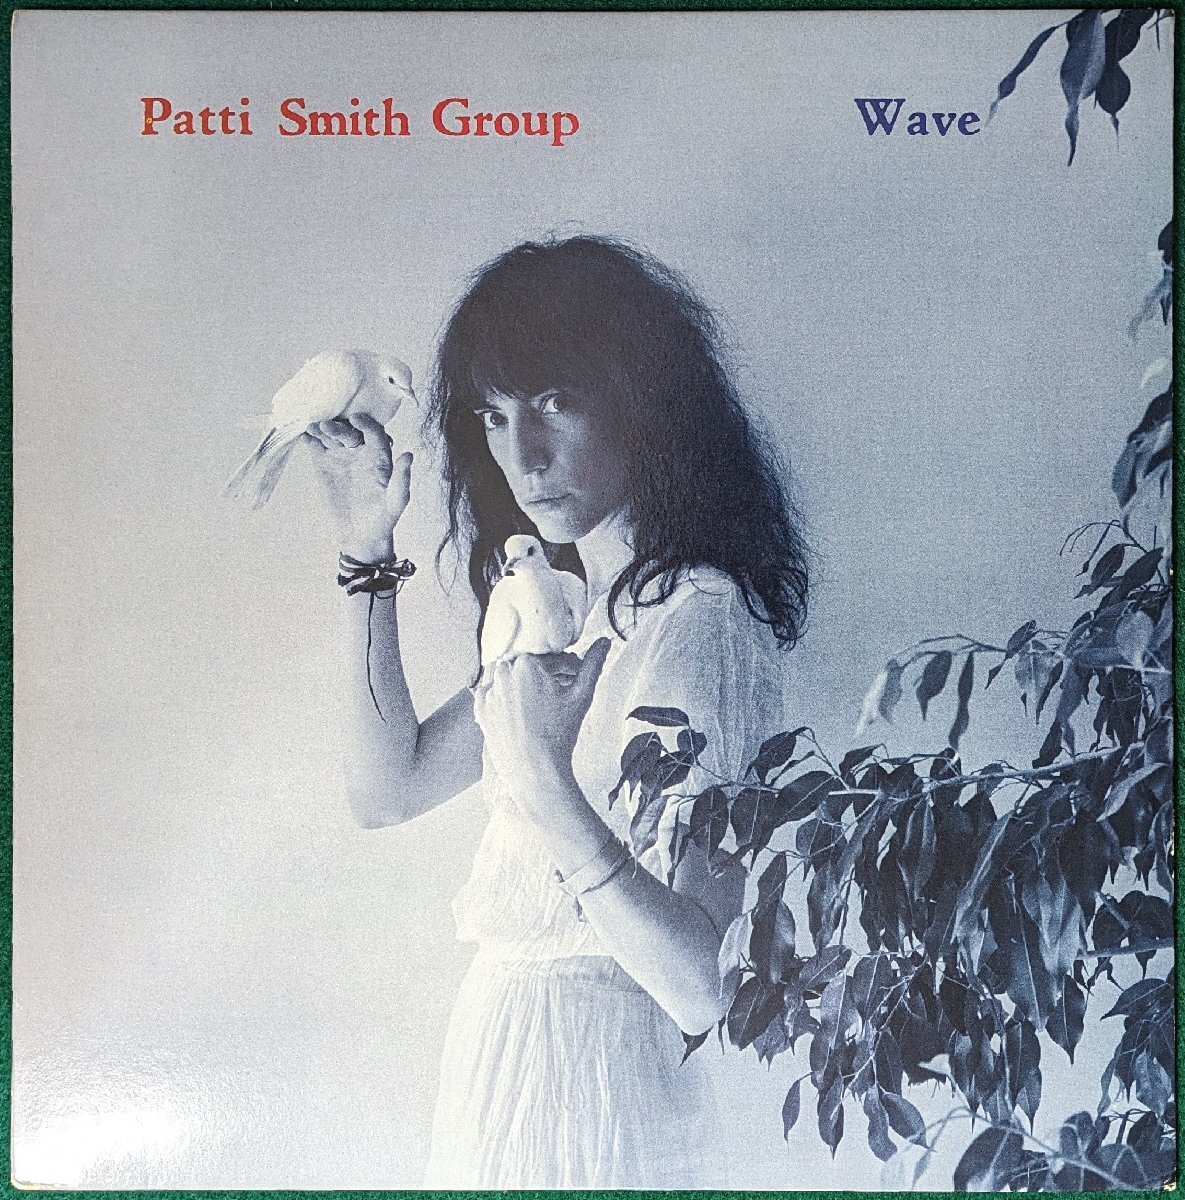  rice record * used LP[WAVE / wave ]PATTI SMITH GROUP / putty .* Smith * group 